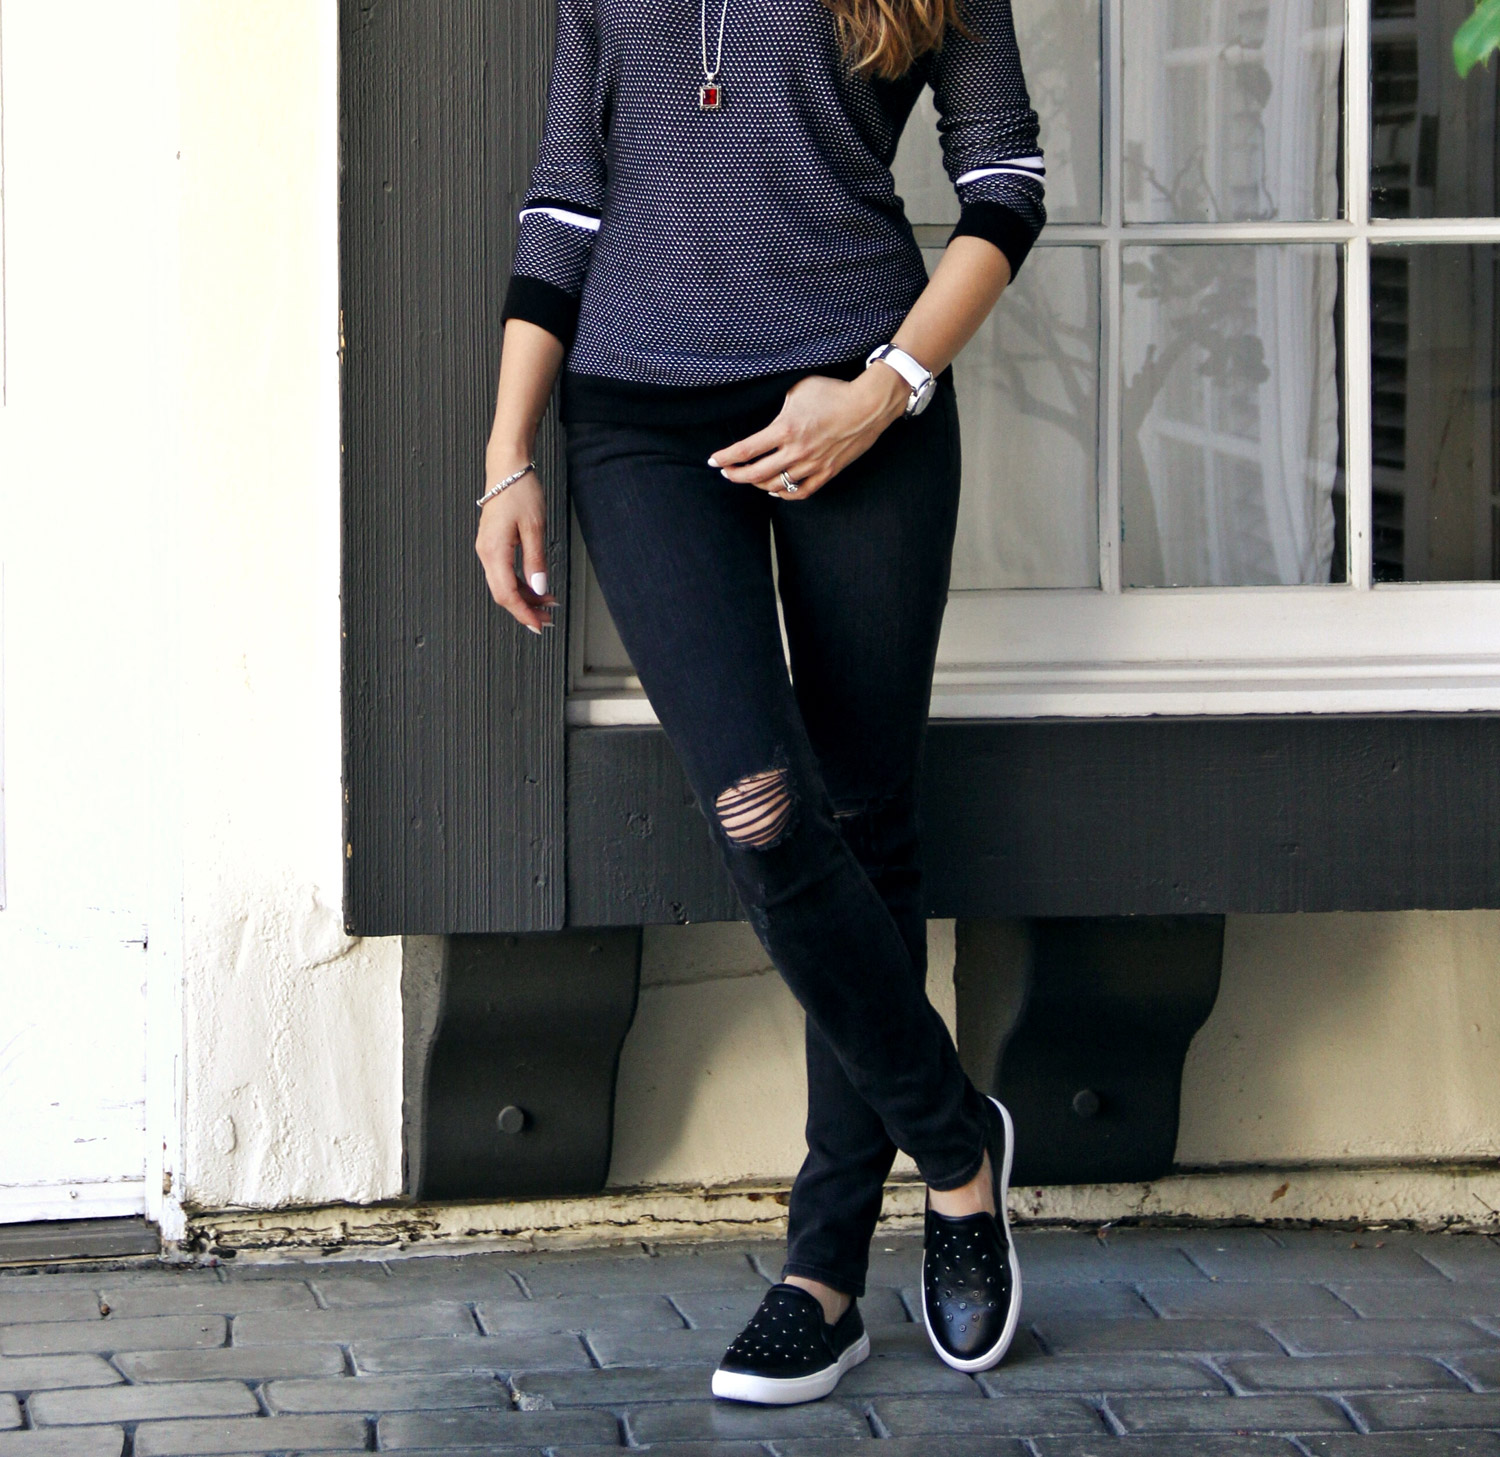 Rag & Bone Jeans, Rag & Bone Sweater, Sneakers, Black and White Outfit